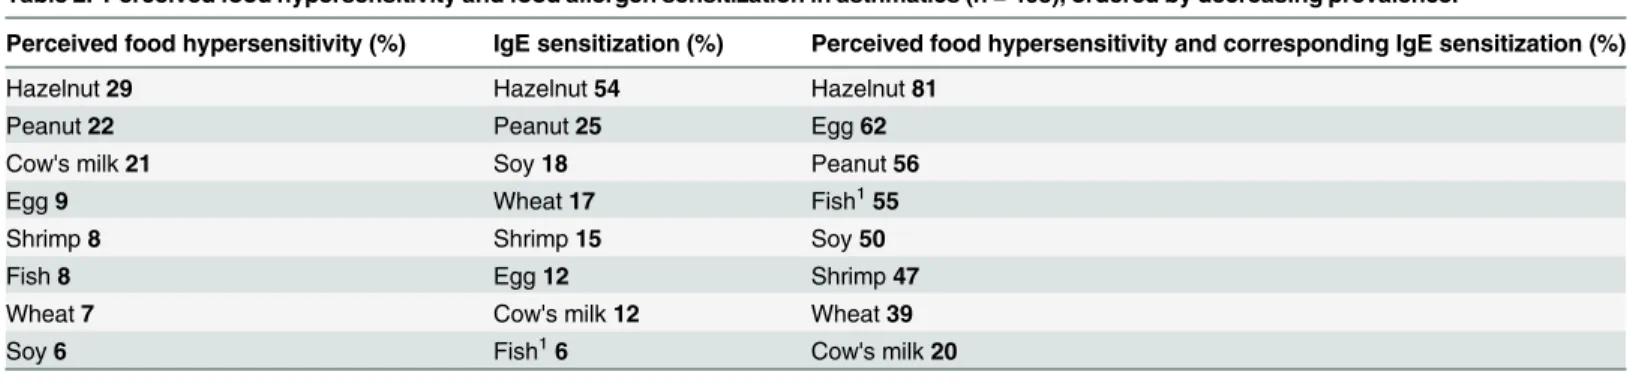 Table 2. Perceived food hypersensitivity and food allergen sensitization in asthmatics (n = 408), ordered by decreasing prevalence.